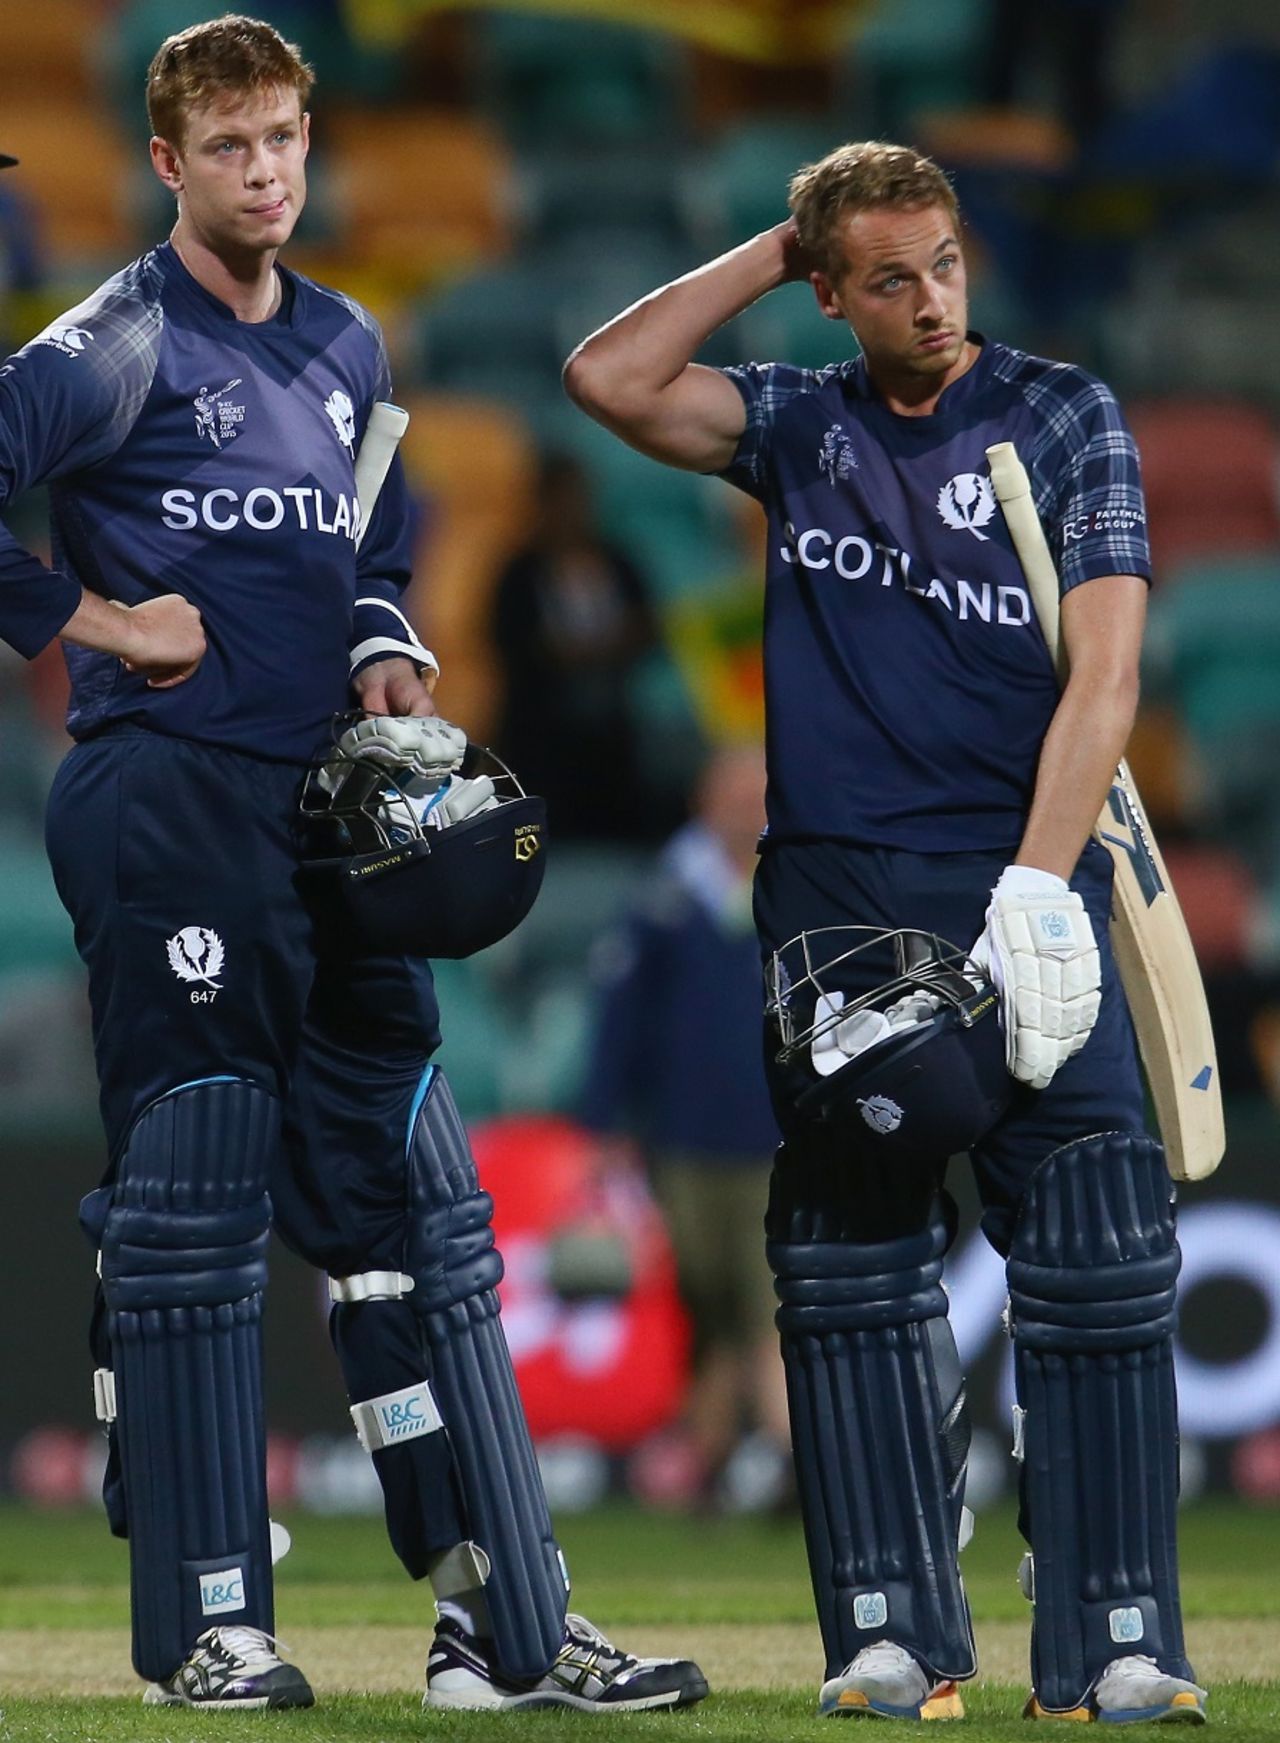 Alasdair Evans and Josh Davey are dejected after Scotland's 148-run defeat, Scotland v Sri Lanka, World Cup 2015, Group A, Hobart, March 11, 2015 